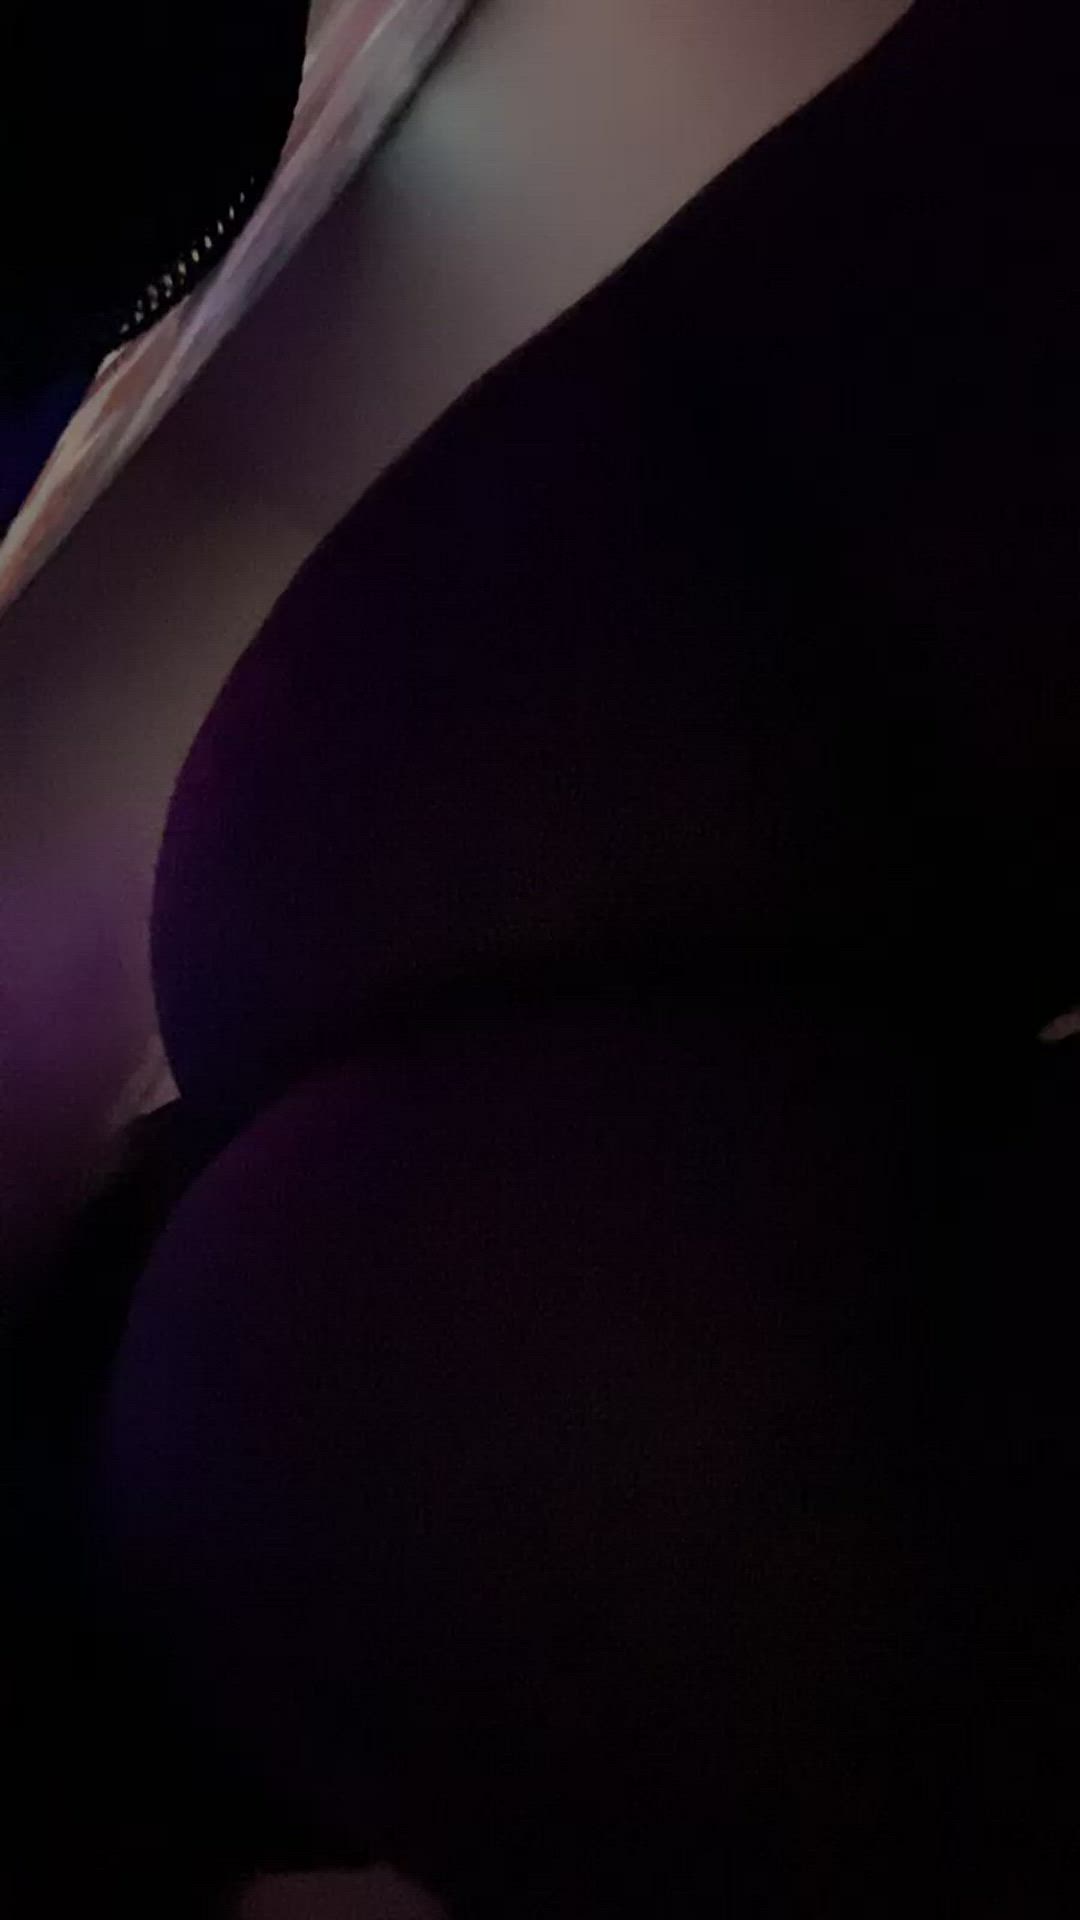 Ass porn video with onlyfans model africanbeauty200 <strong>@africanbeauty200</strong>